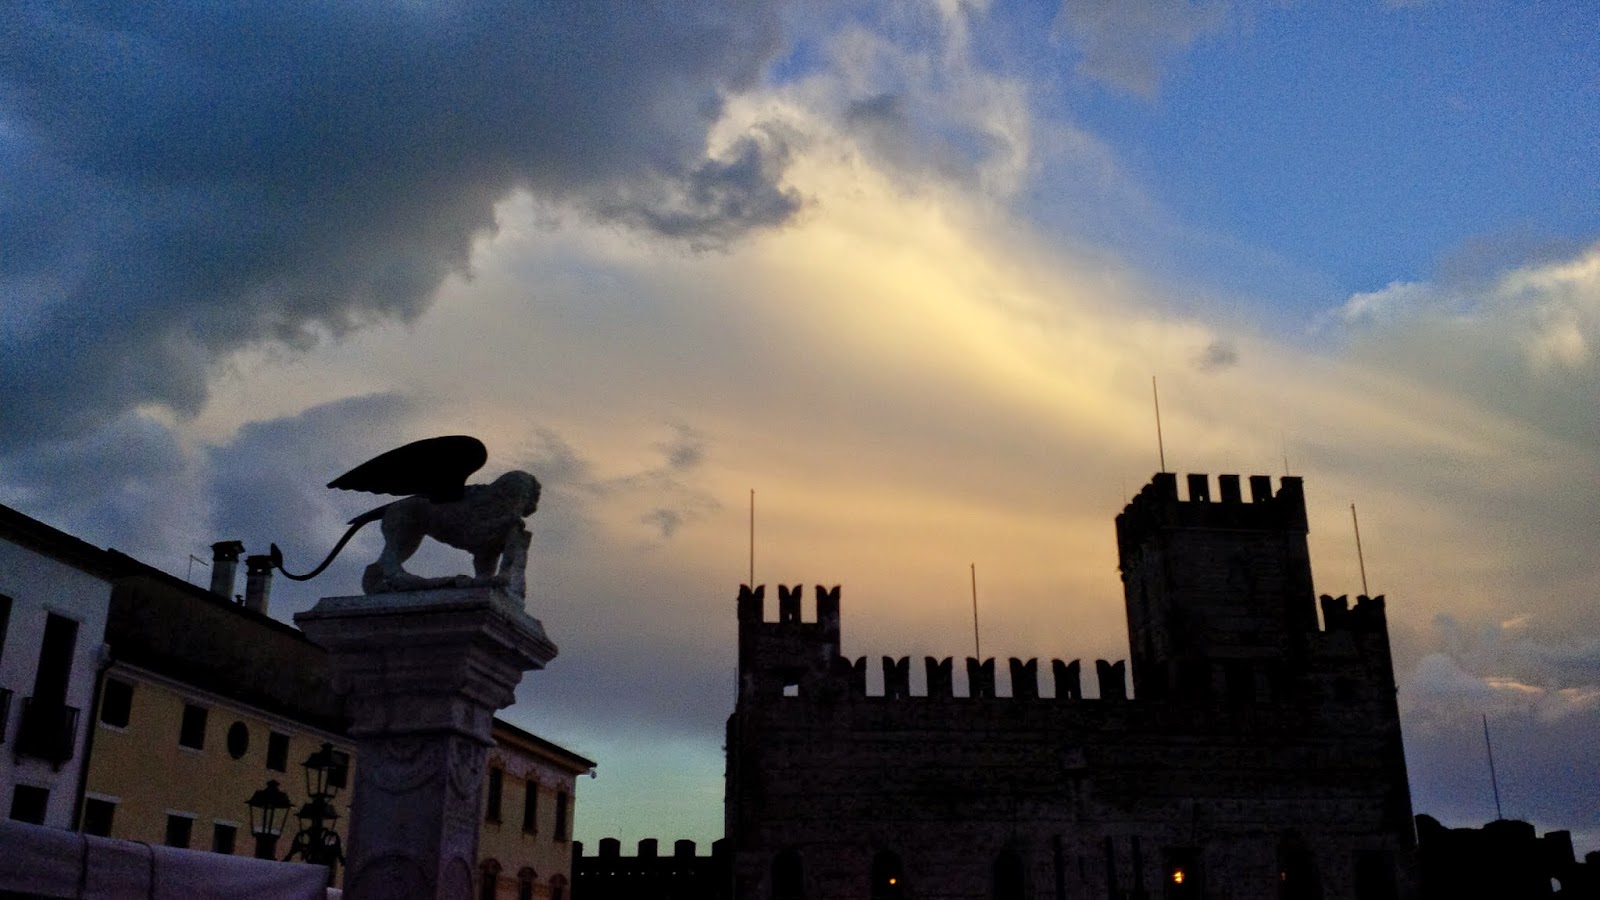 The winged lion and the Lower Castle in Marostica